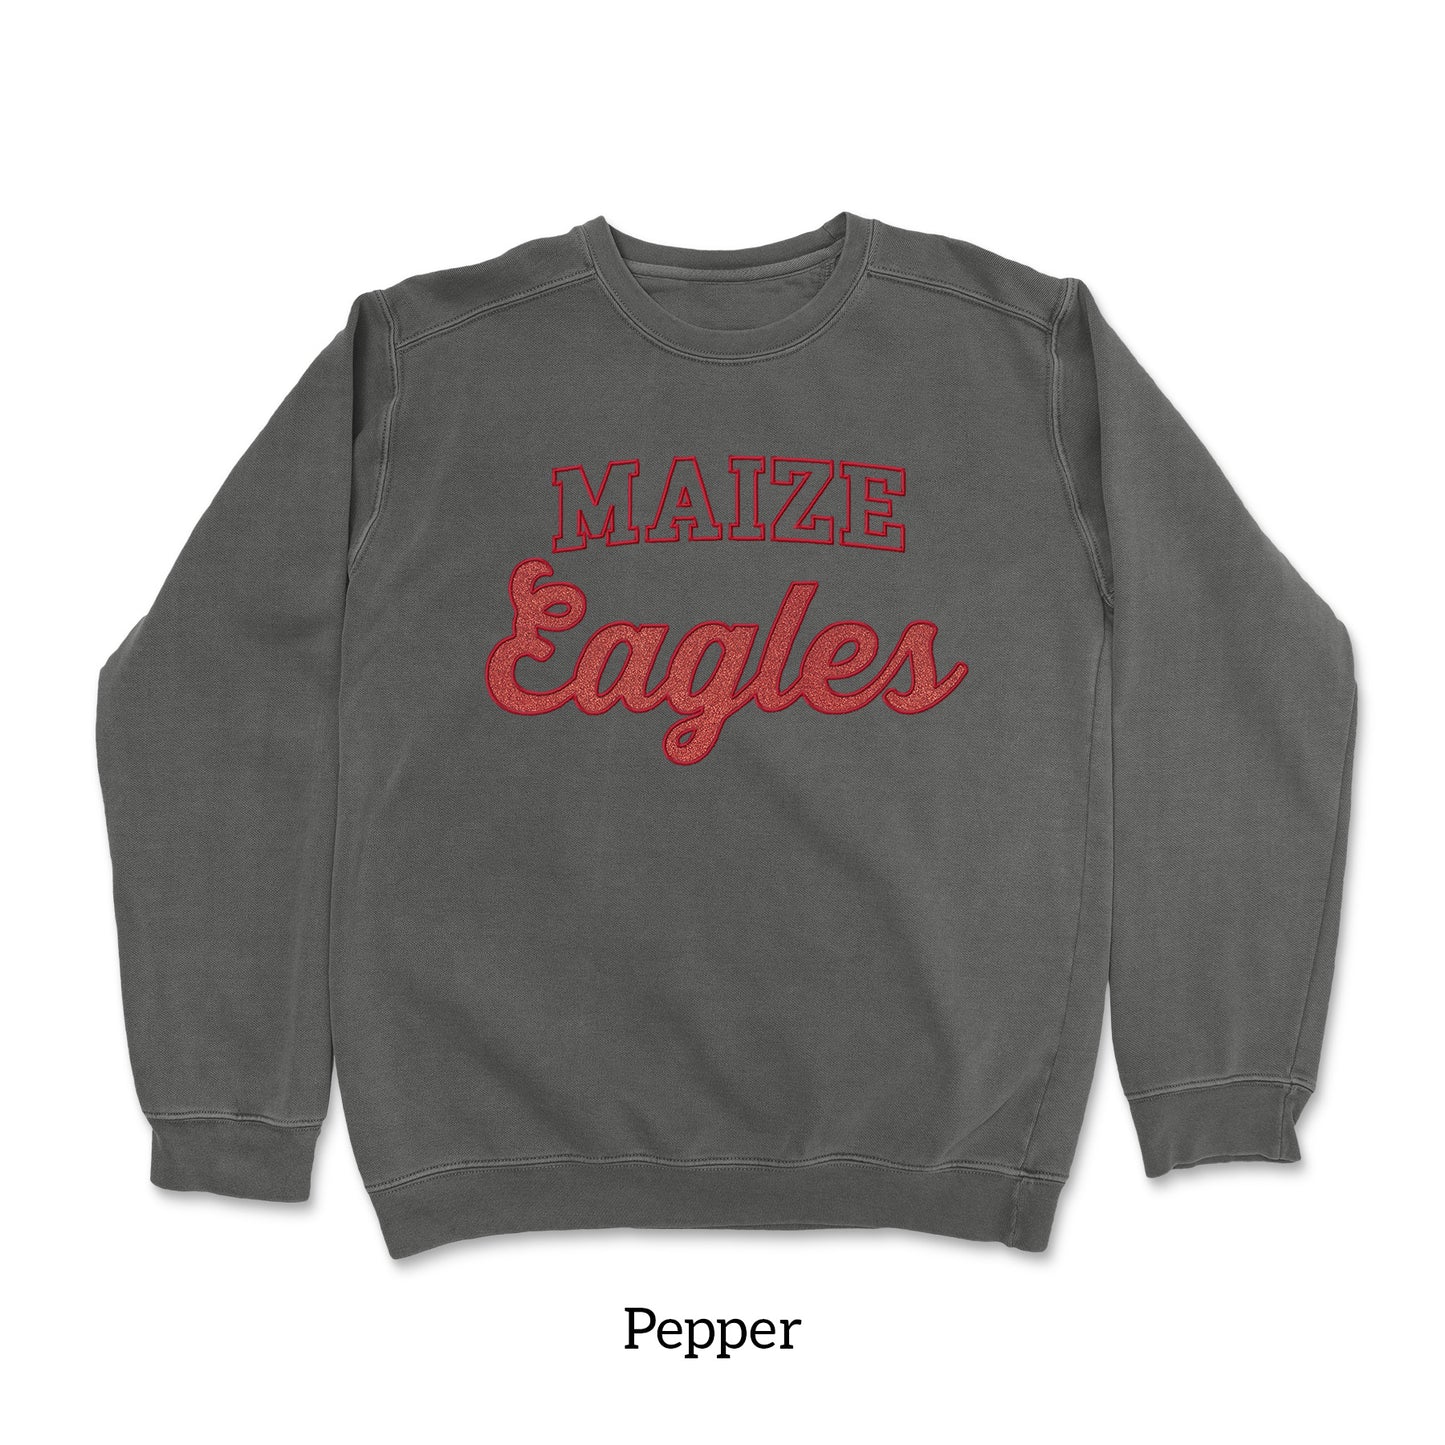 MMS PTO-Maize Eagles GLITTER Applique Embroidered Garment Dyed Crewneck Sweatshirt (2 Color Options)